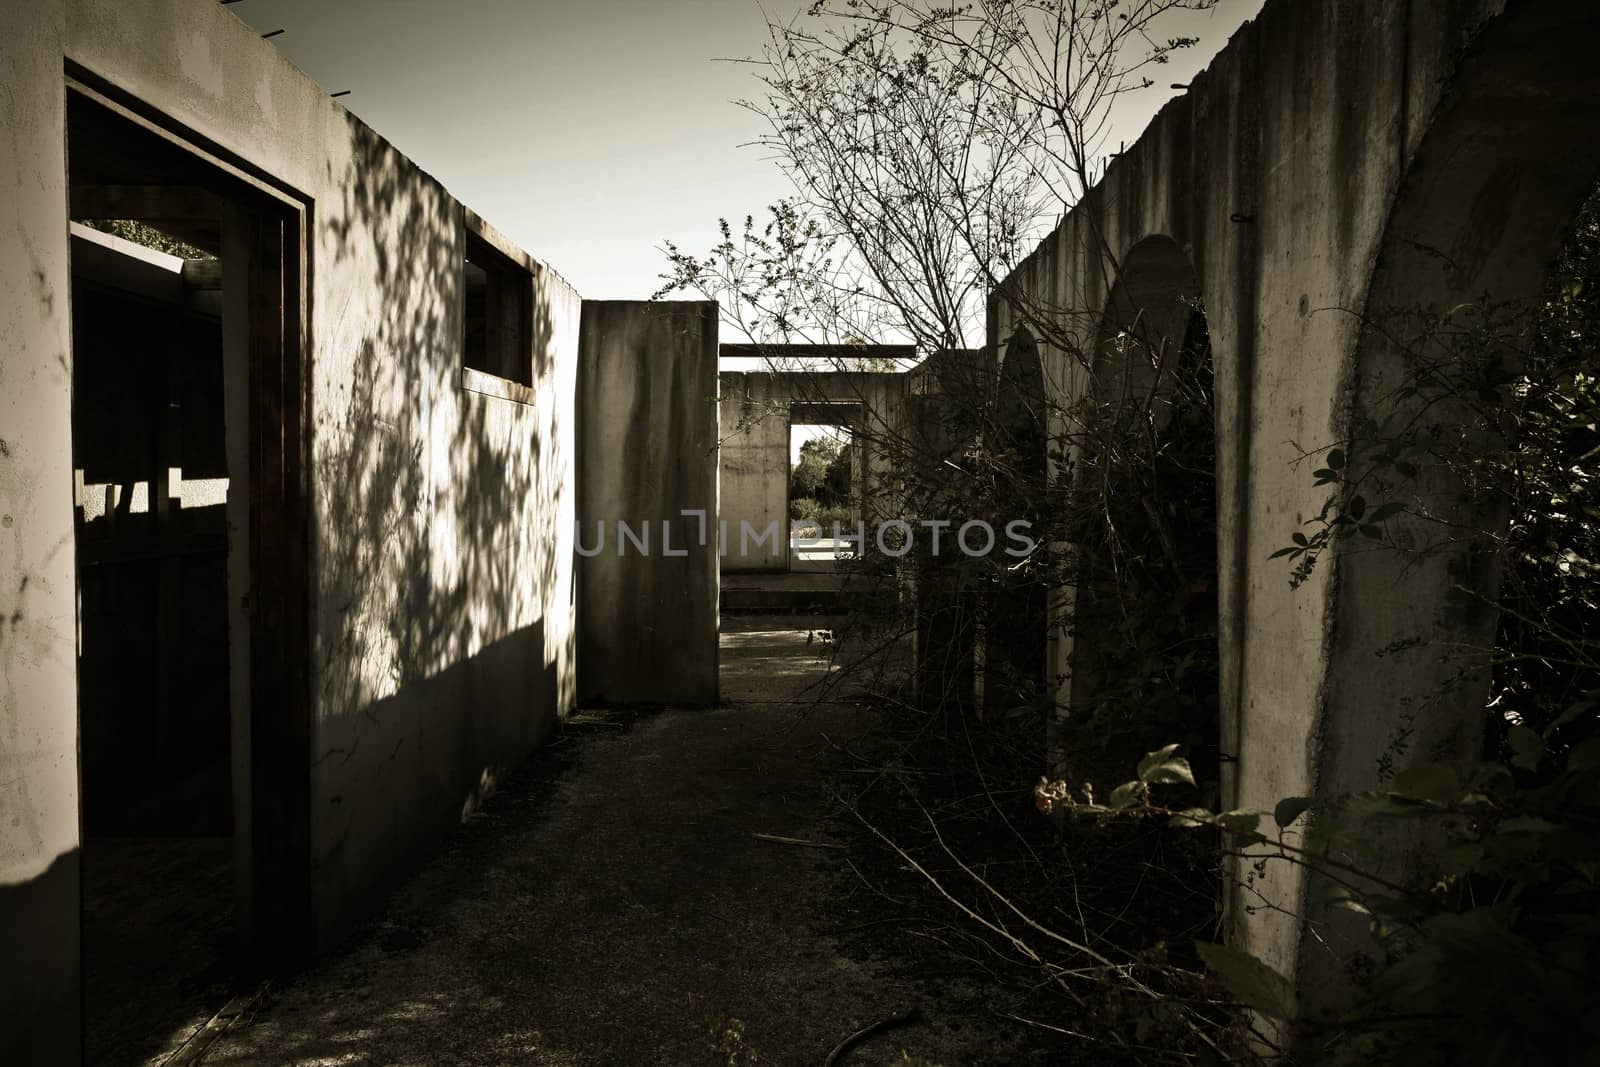 Dark gloomy image of a dilapidated abandoned building without a roof and a view right through the building out of an old doorway to the countryside beyond